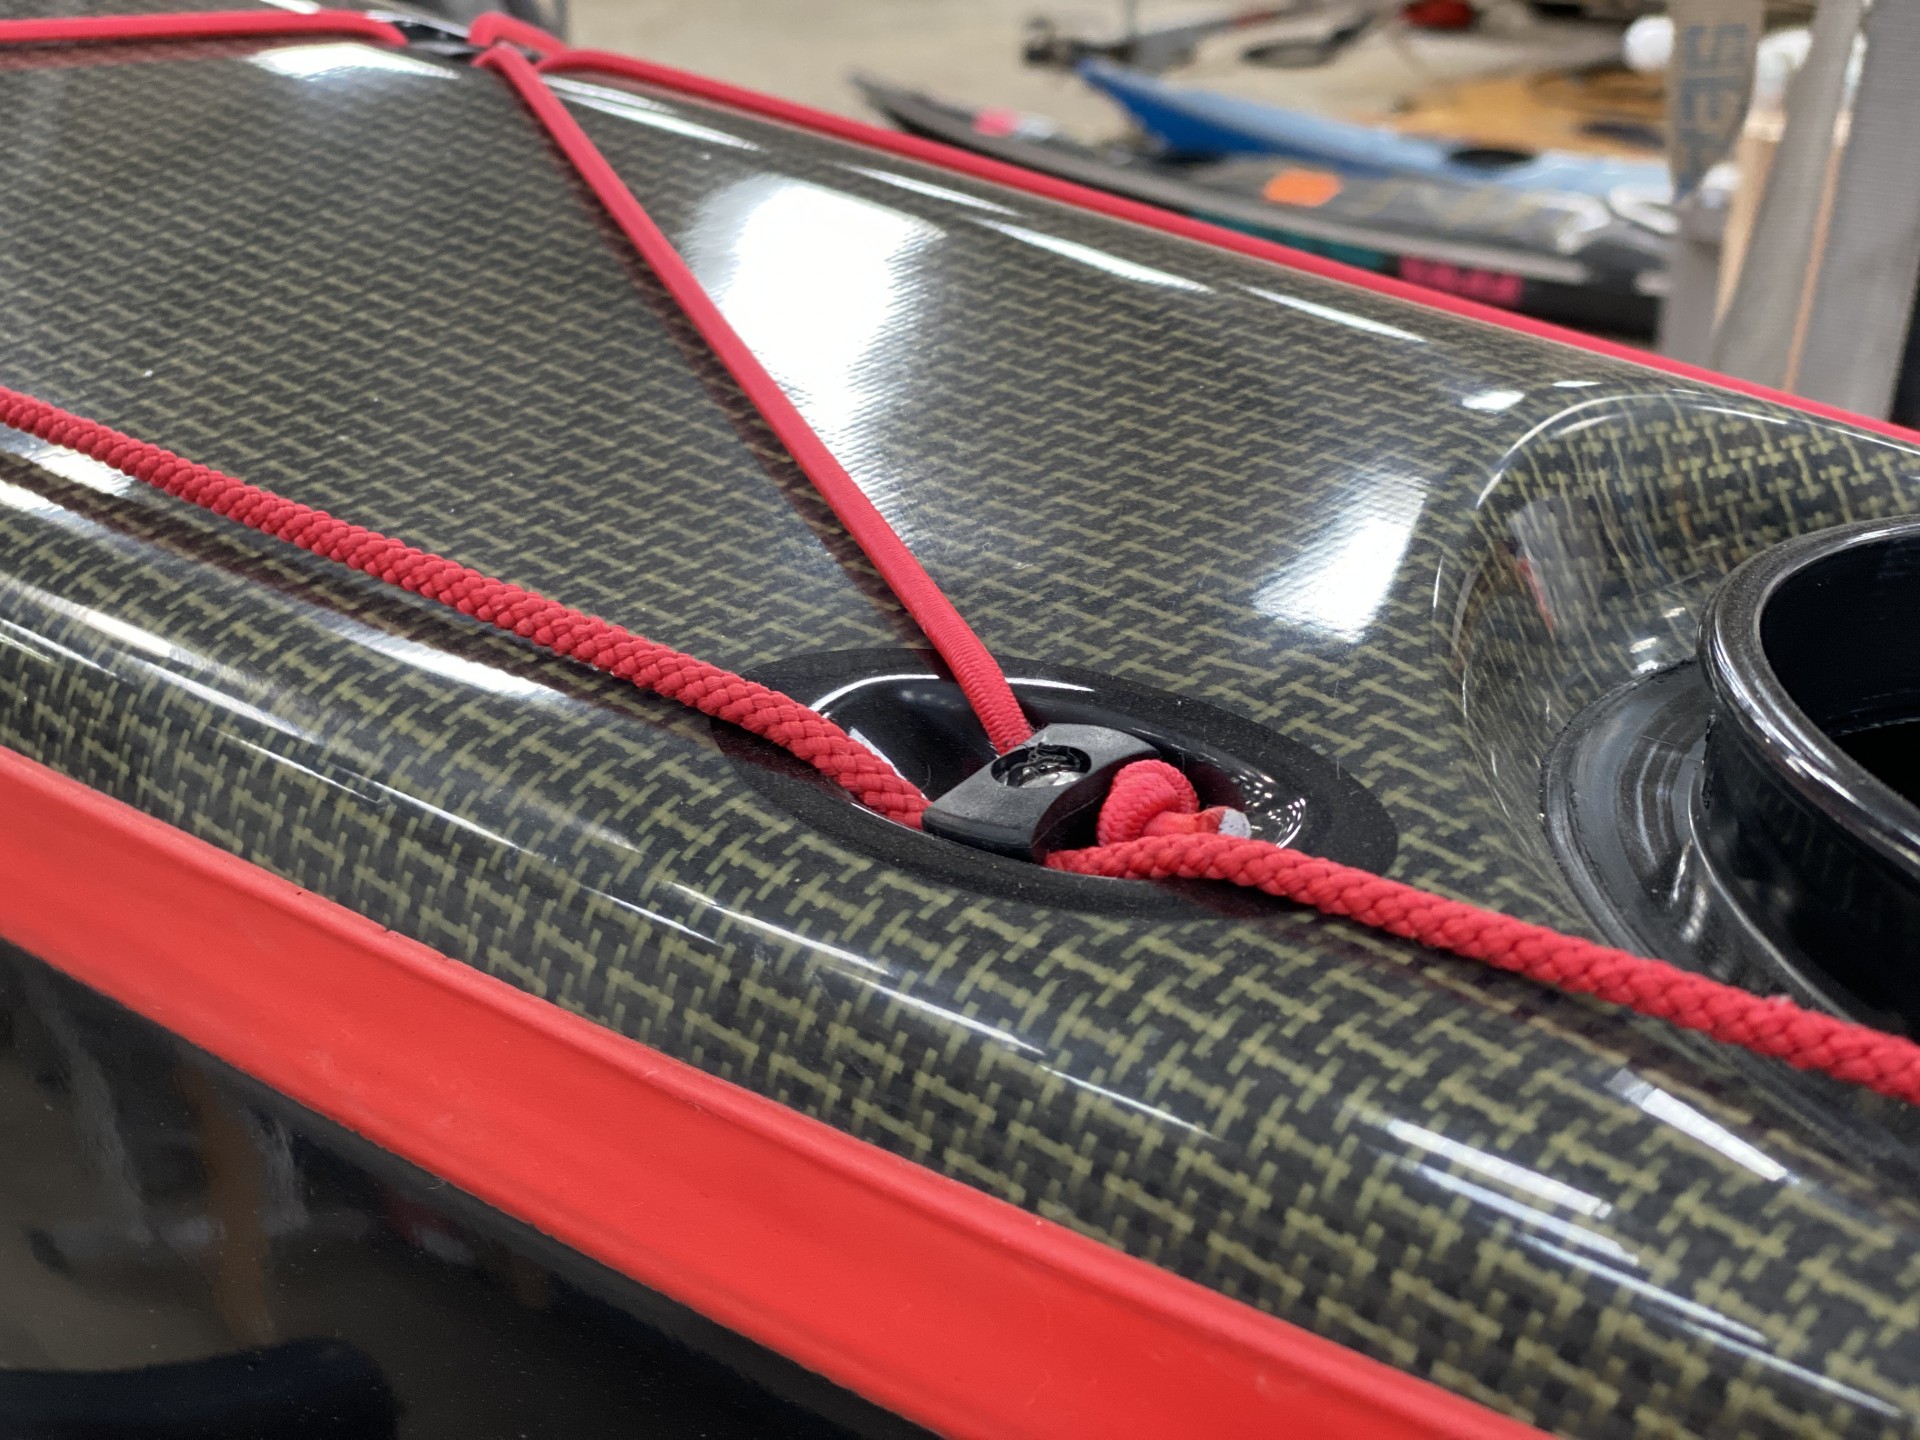 Explorer expedition fibreglass and carbon sea kayak with black hull and red trim